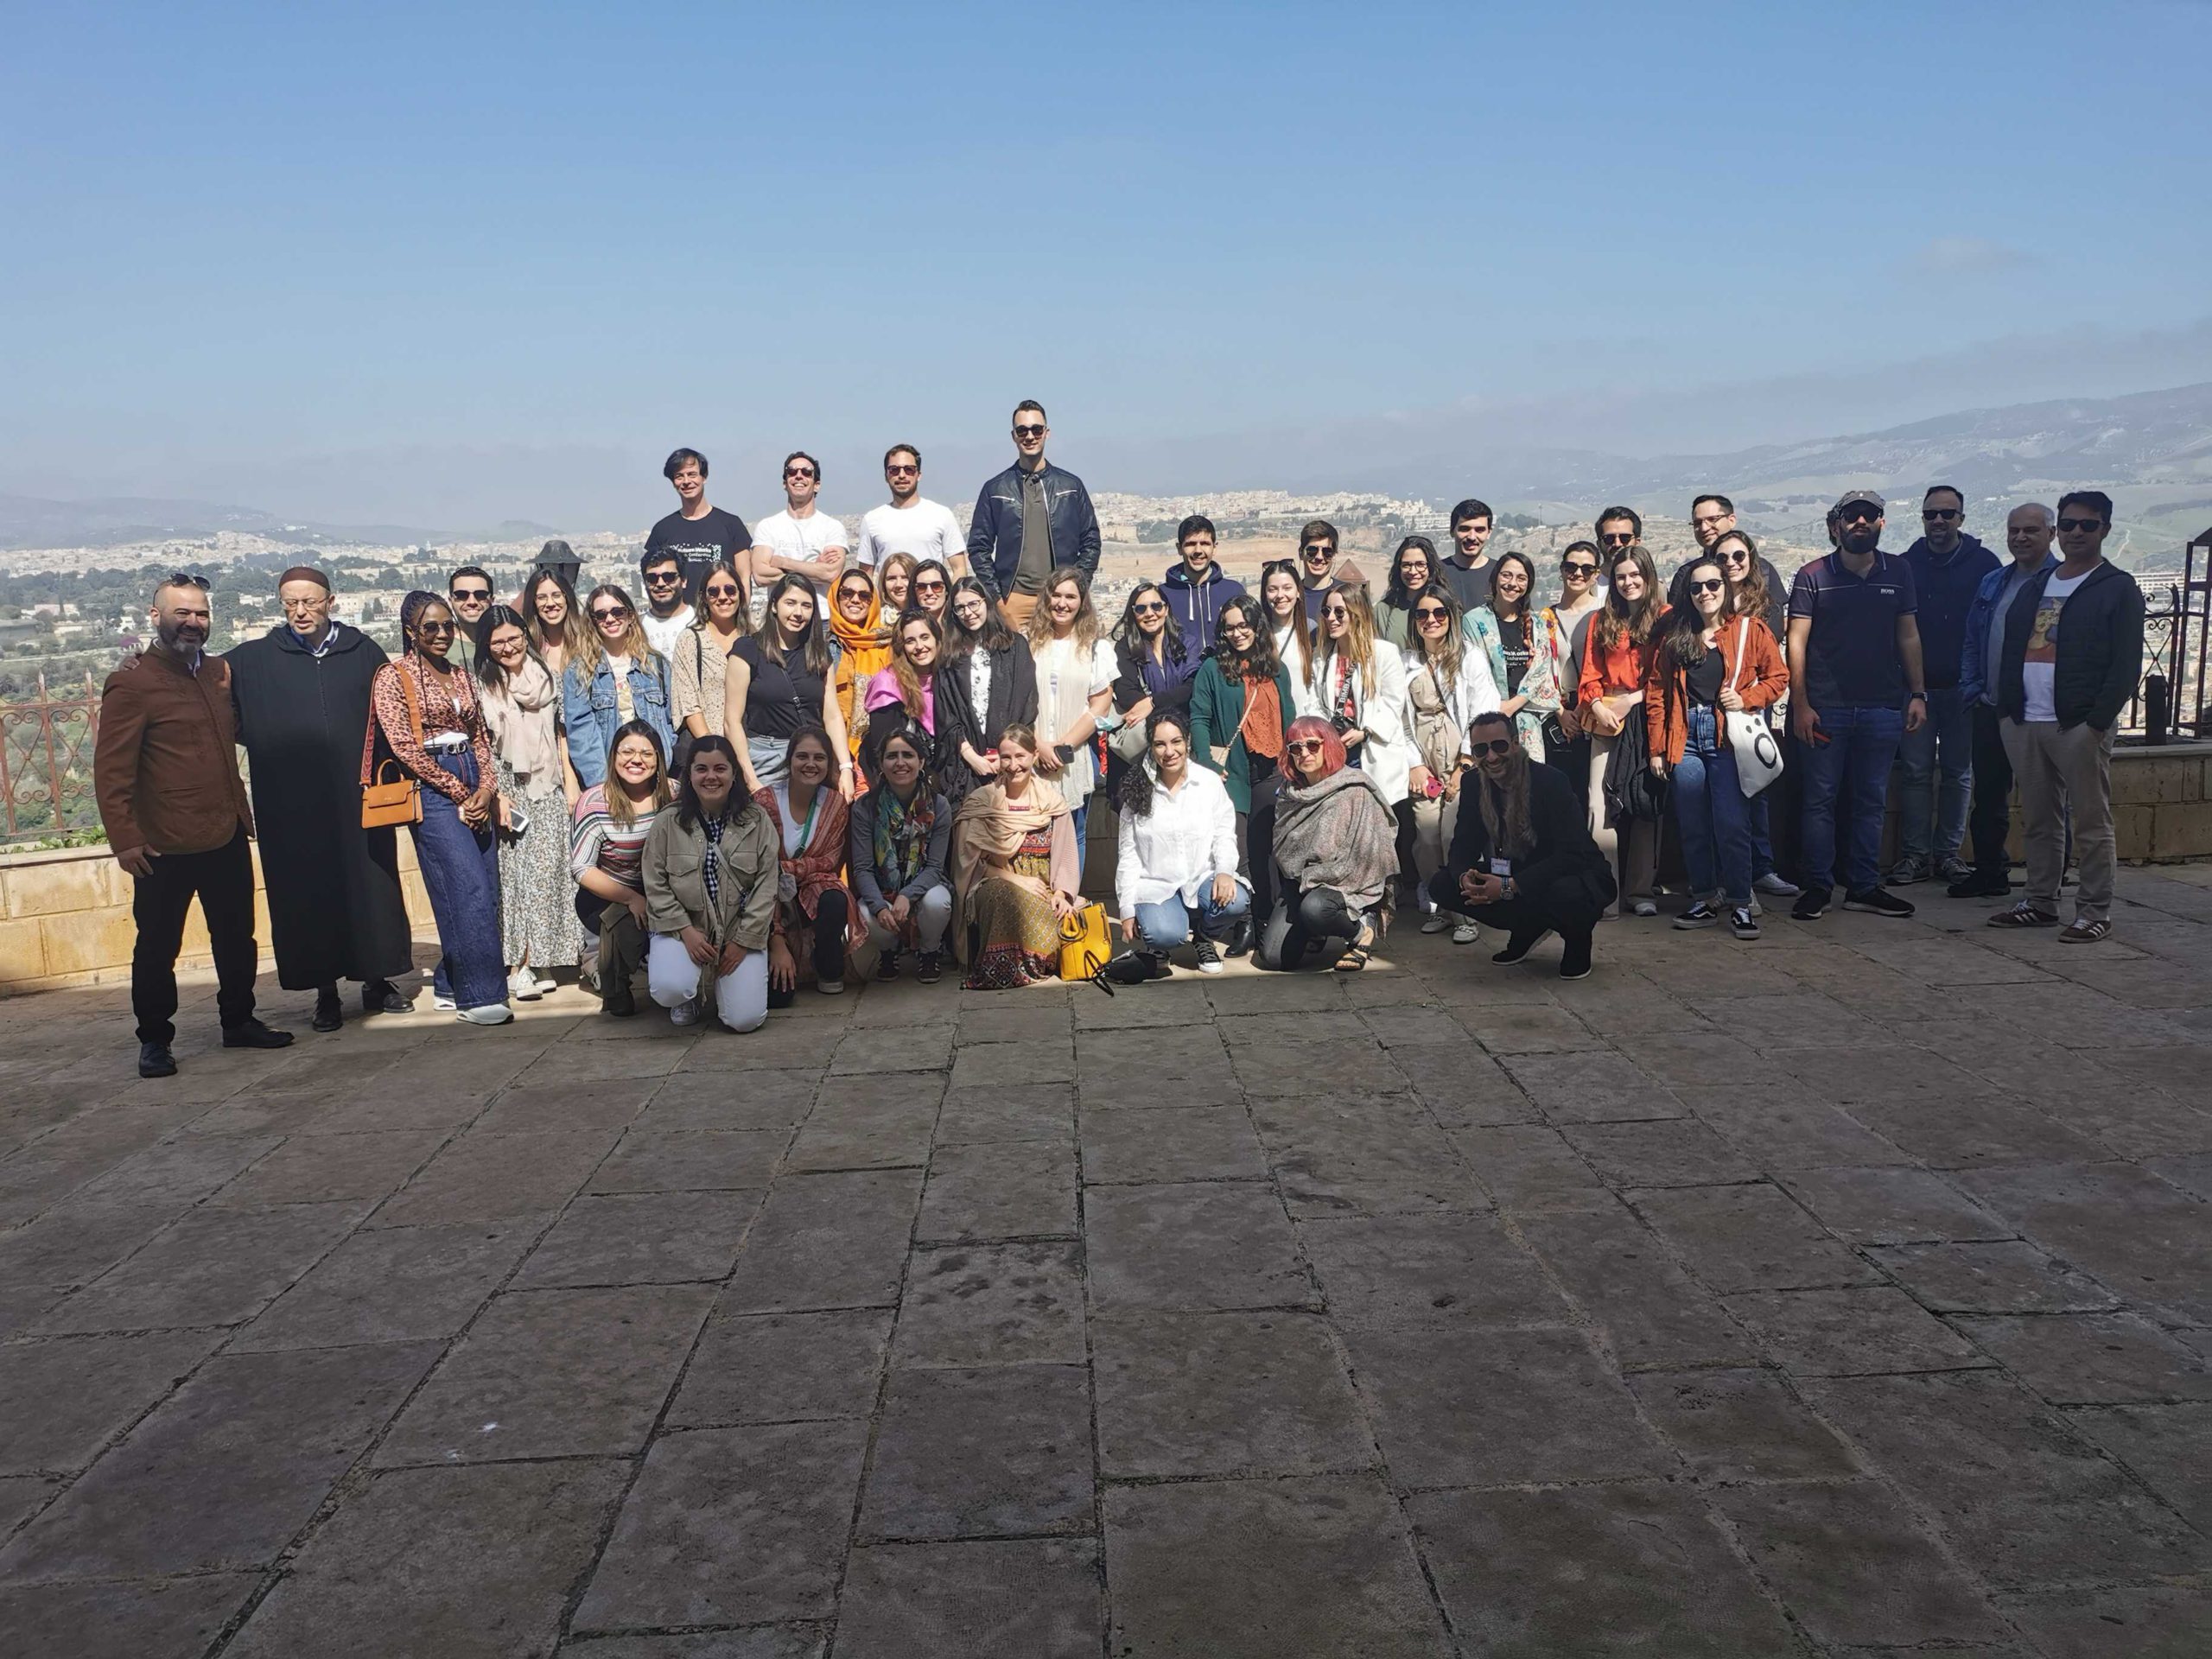 group photo in Morocco